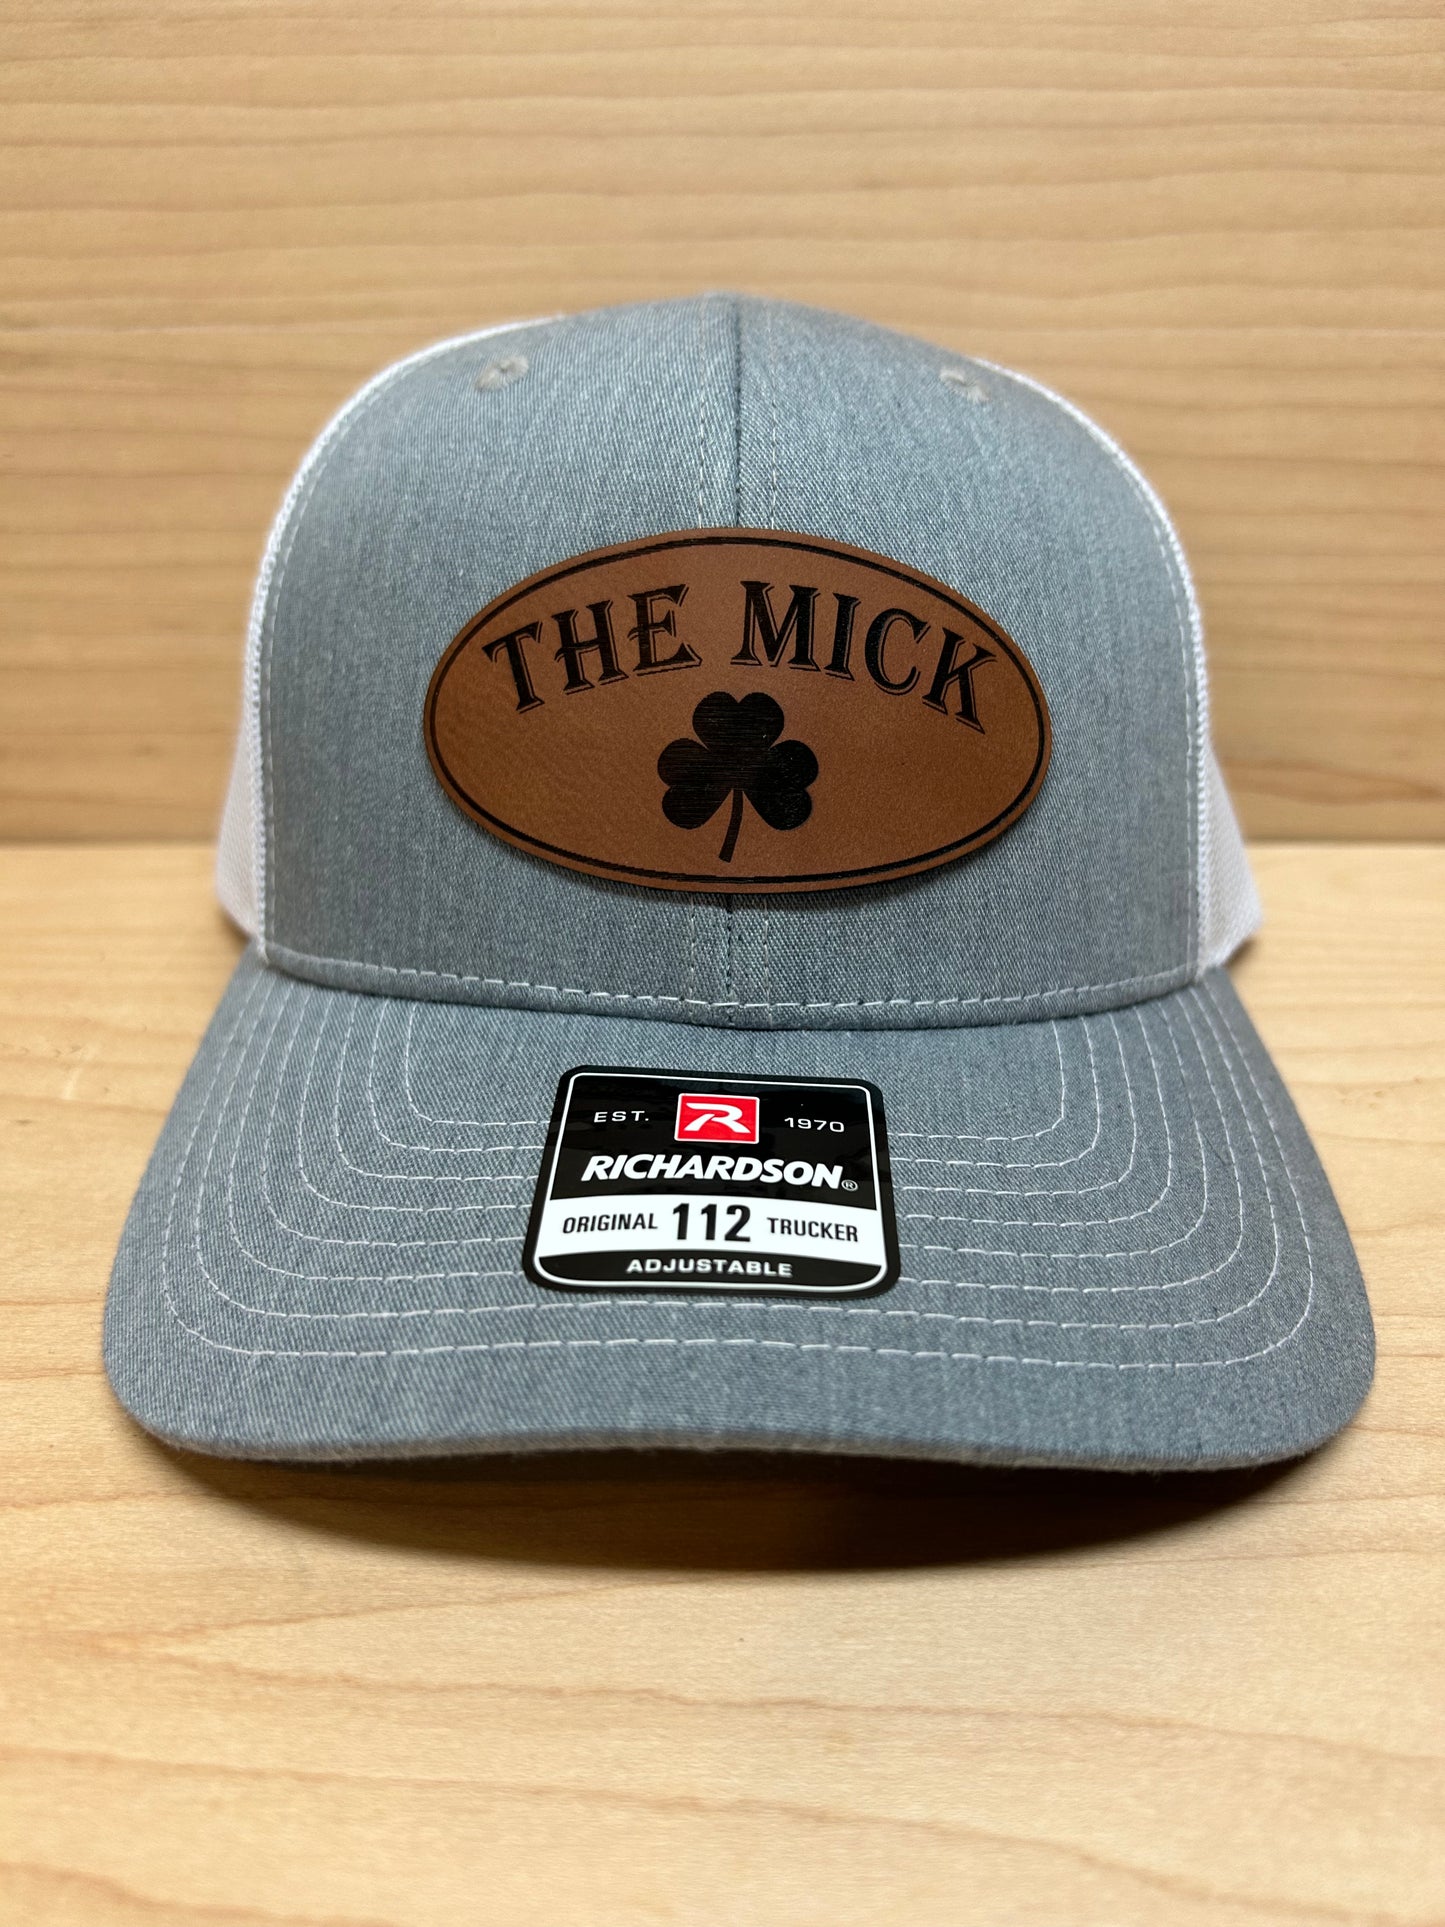 The Mick Hat